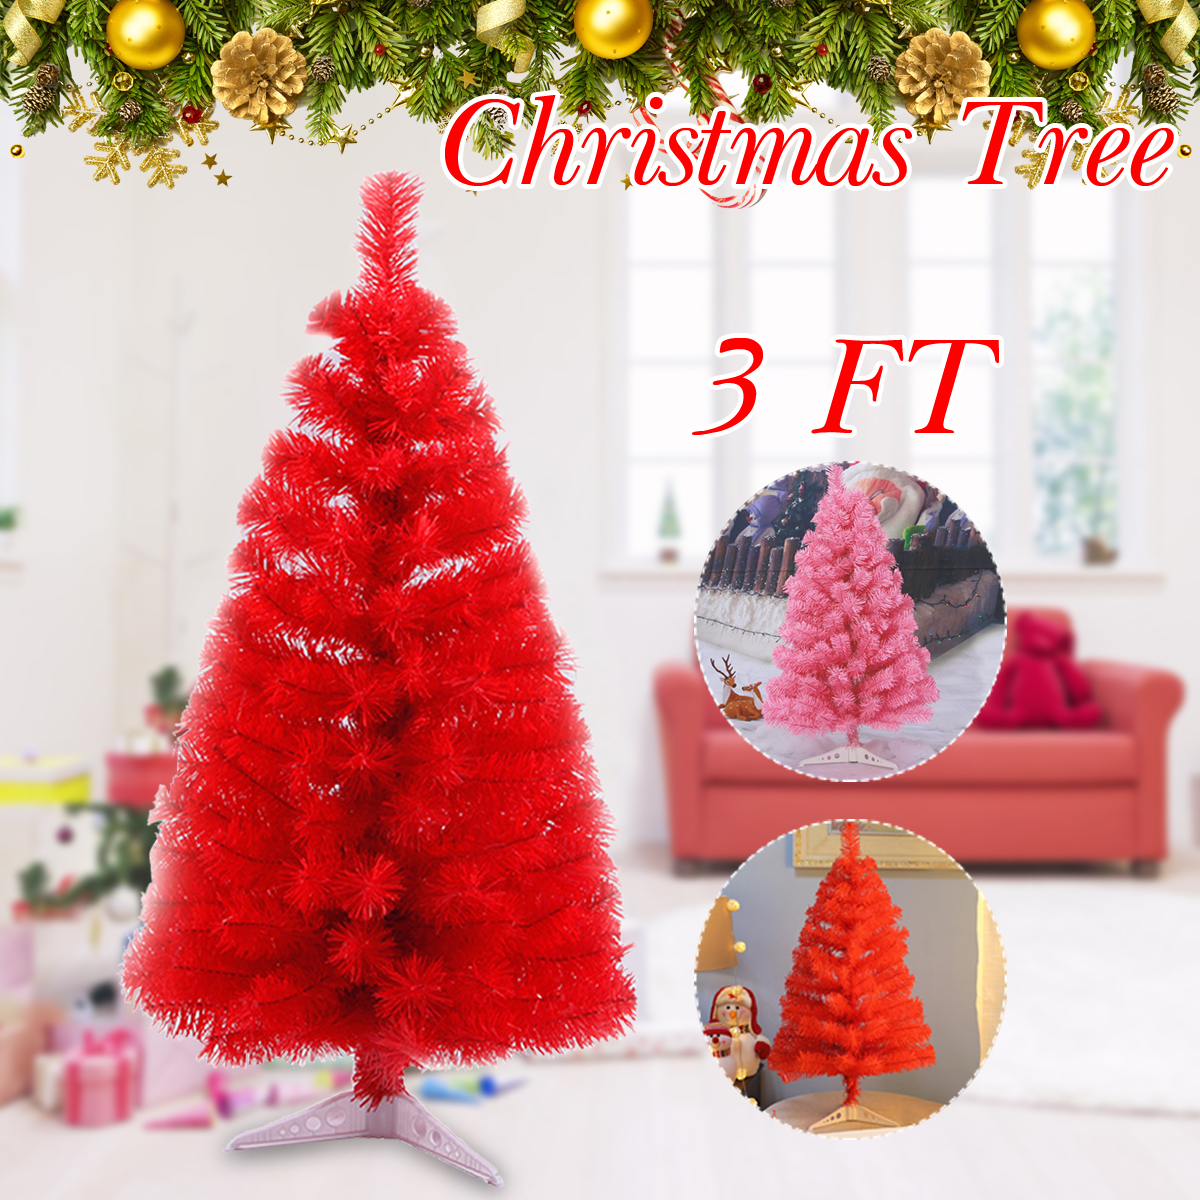 Christmas-Tree-3FT-Xmas-Decor-For-Childrens--Toddler-Play-Decorations-Home-1605826-1